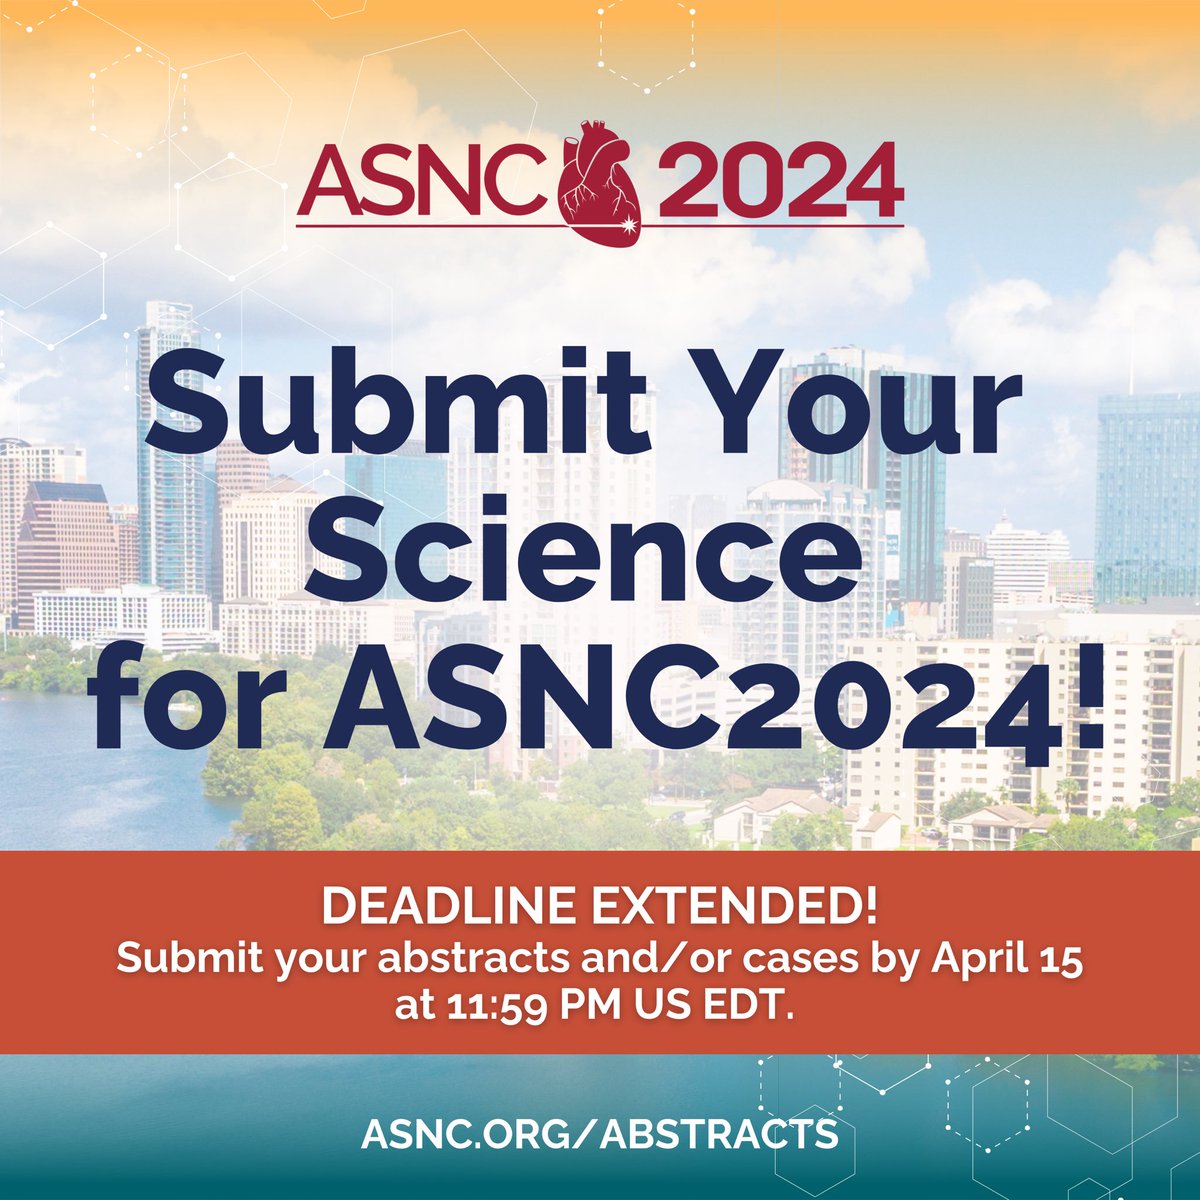 Deadline extended to submit research and cases for #ASNC2024. Fantastic opportunity for trainees to get feedback from and network with many leaders in CV imaging. @RBP0612 @LPhillipsMD @almallahmo #cvNuc #ACCFIT #AHAFIT